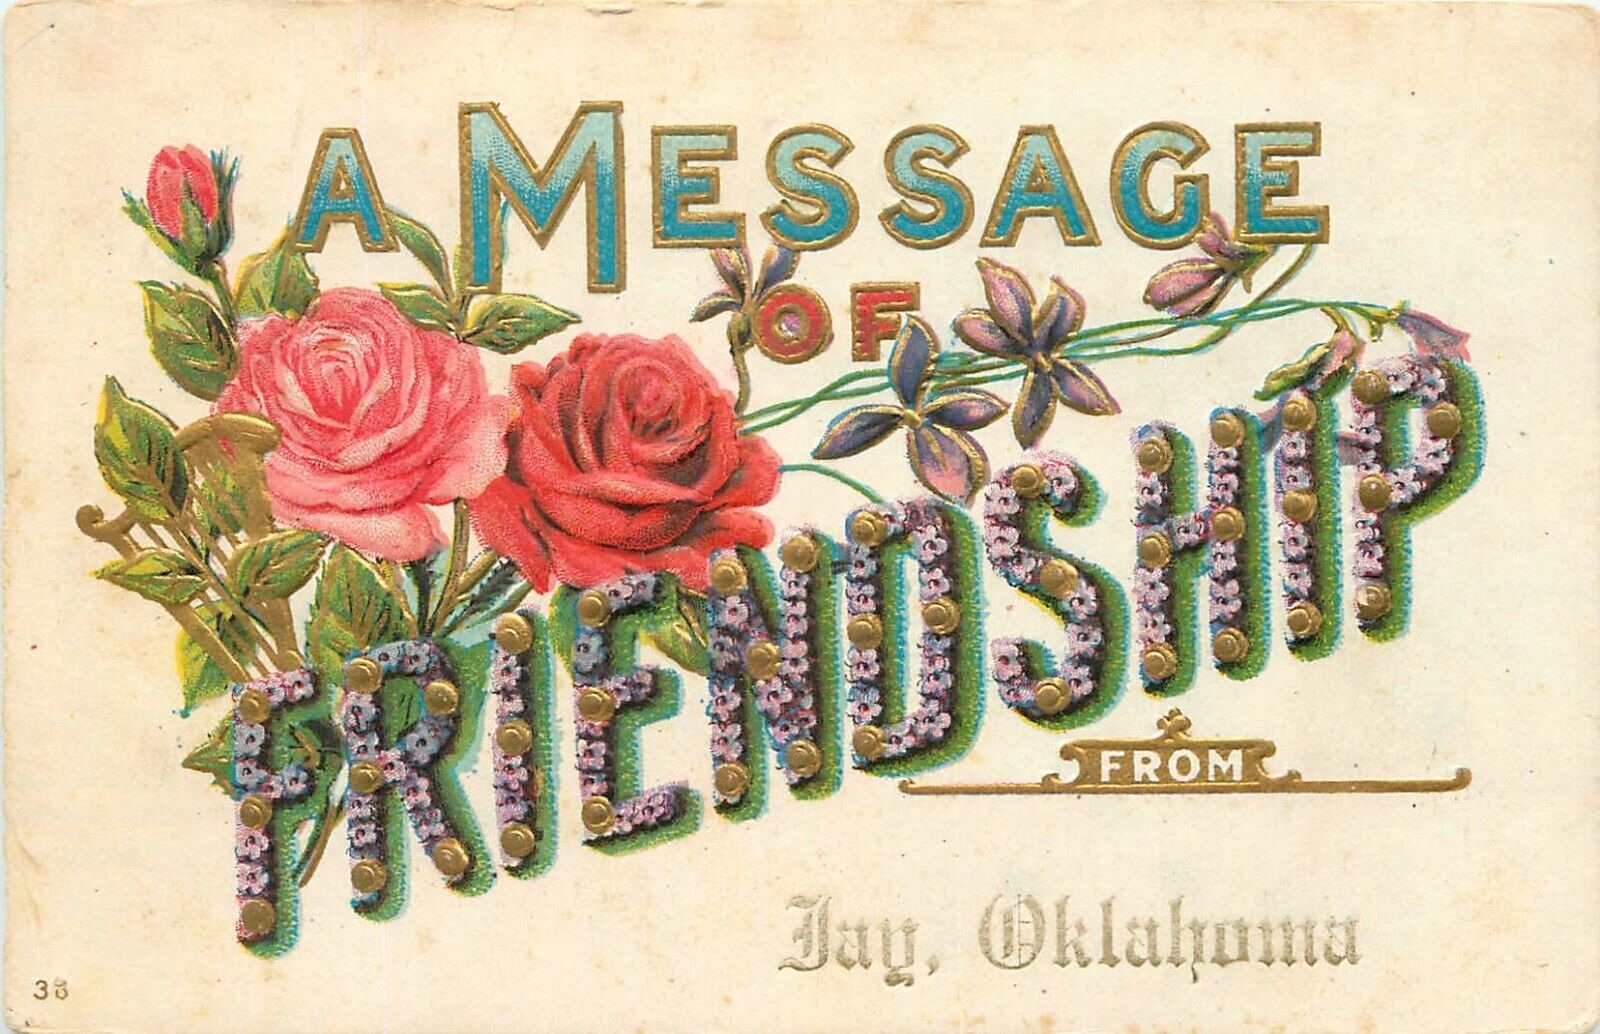 1912 A Message of Friendship From Jay, Oklahoma Embossed Postcard